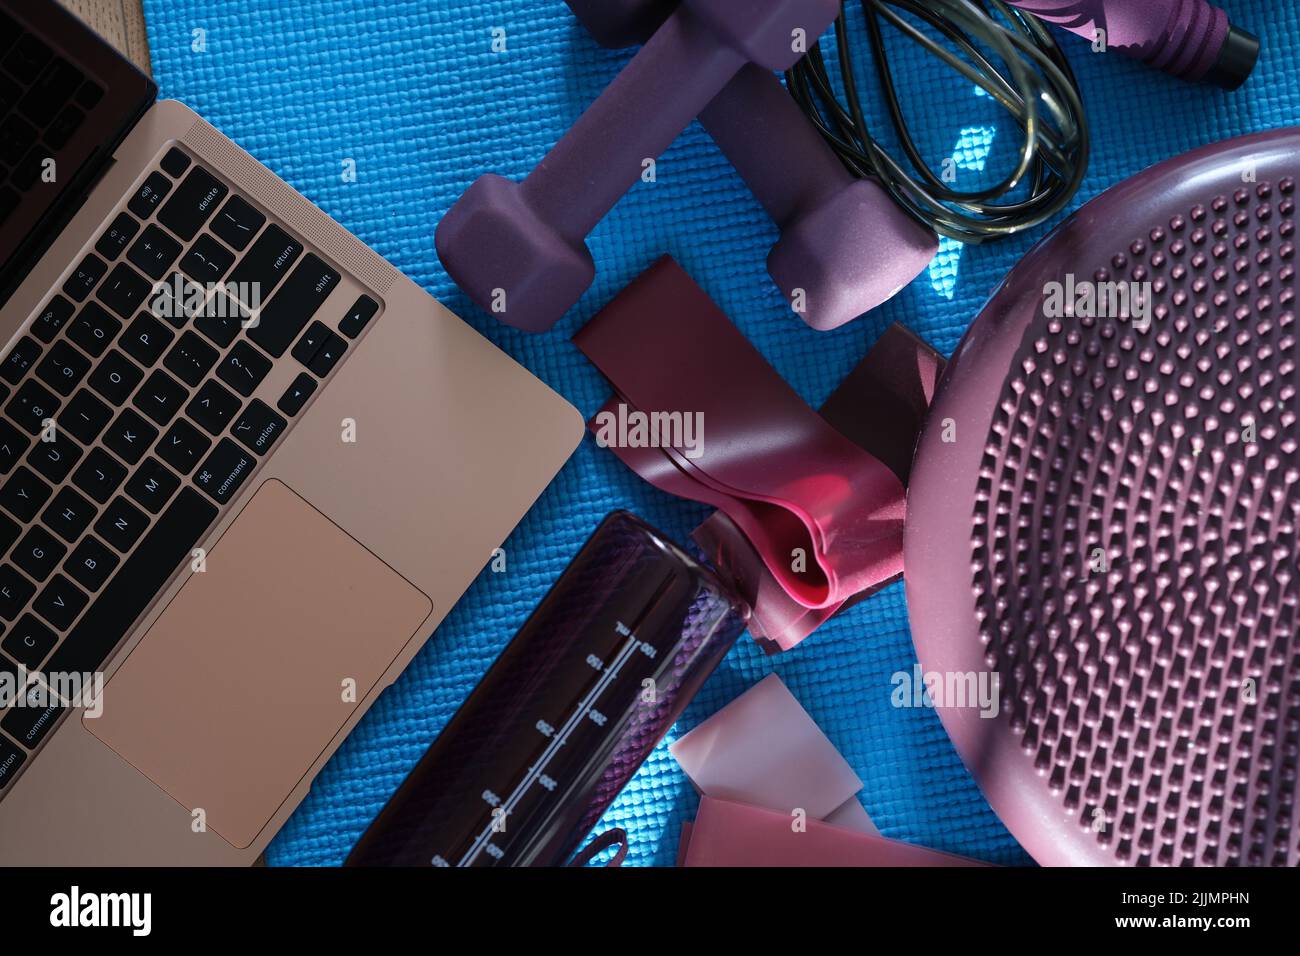 Laptop with purple sports equipment on sports mat top view Stock Photo